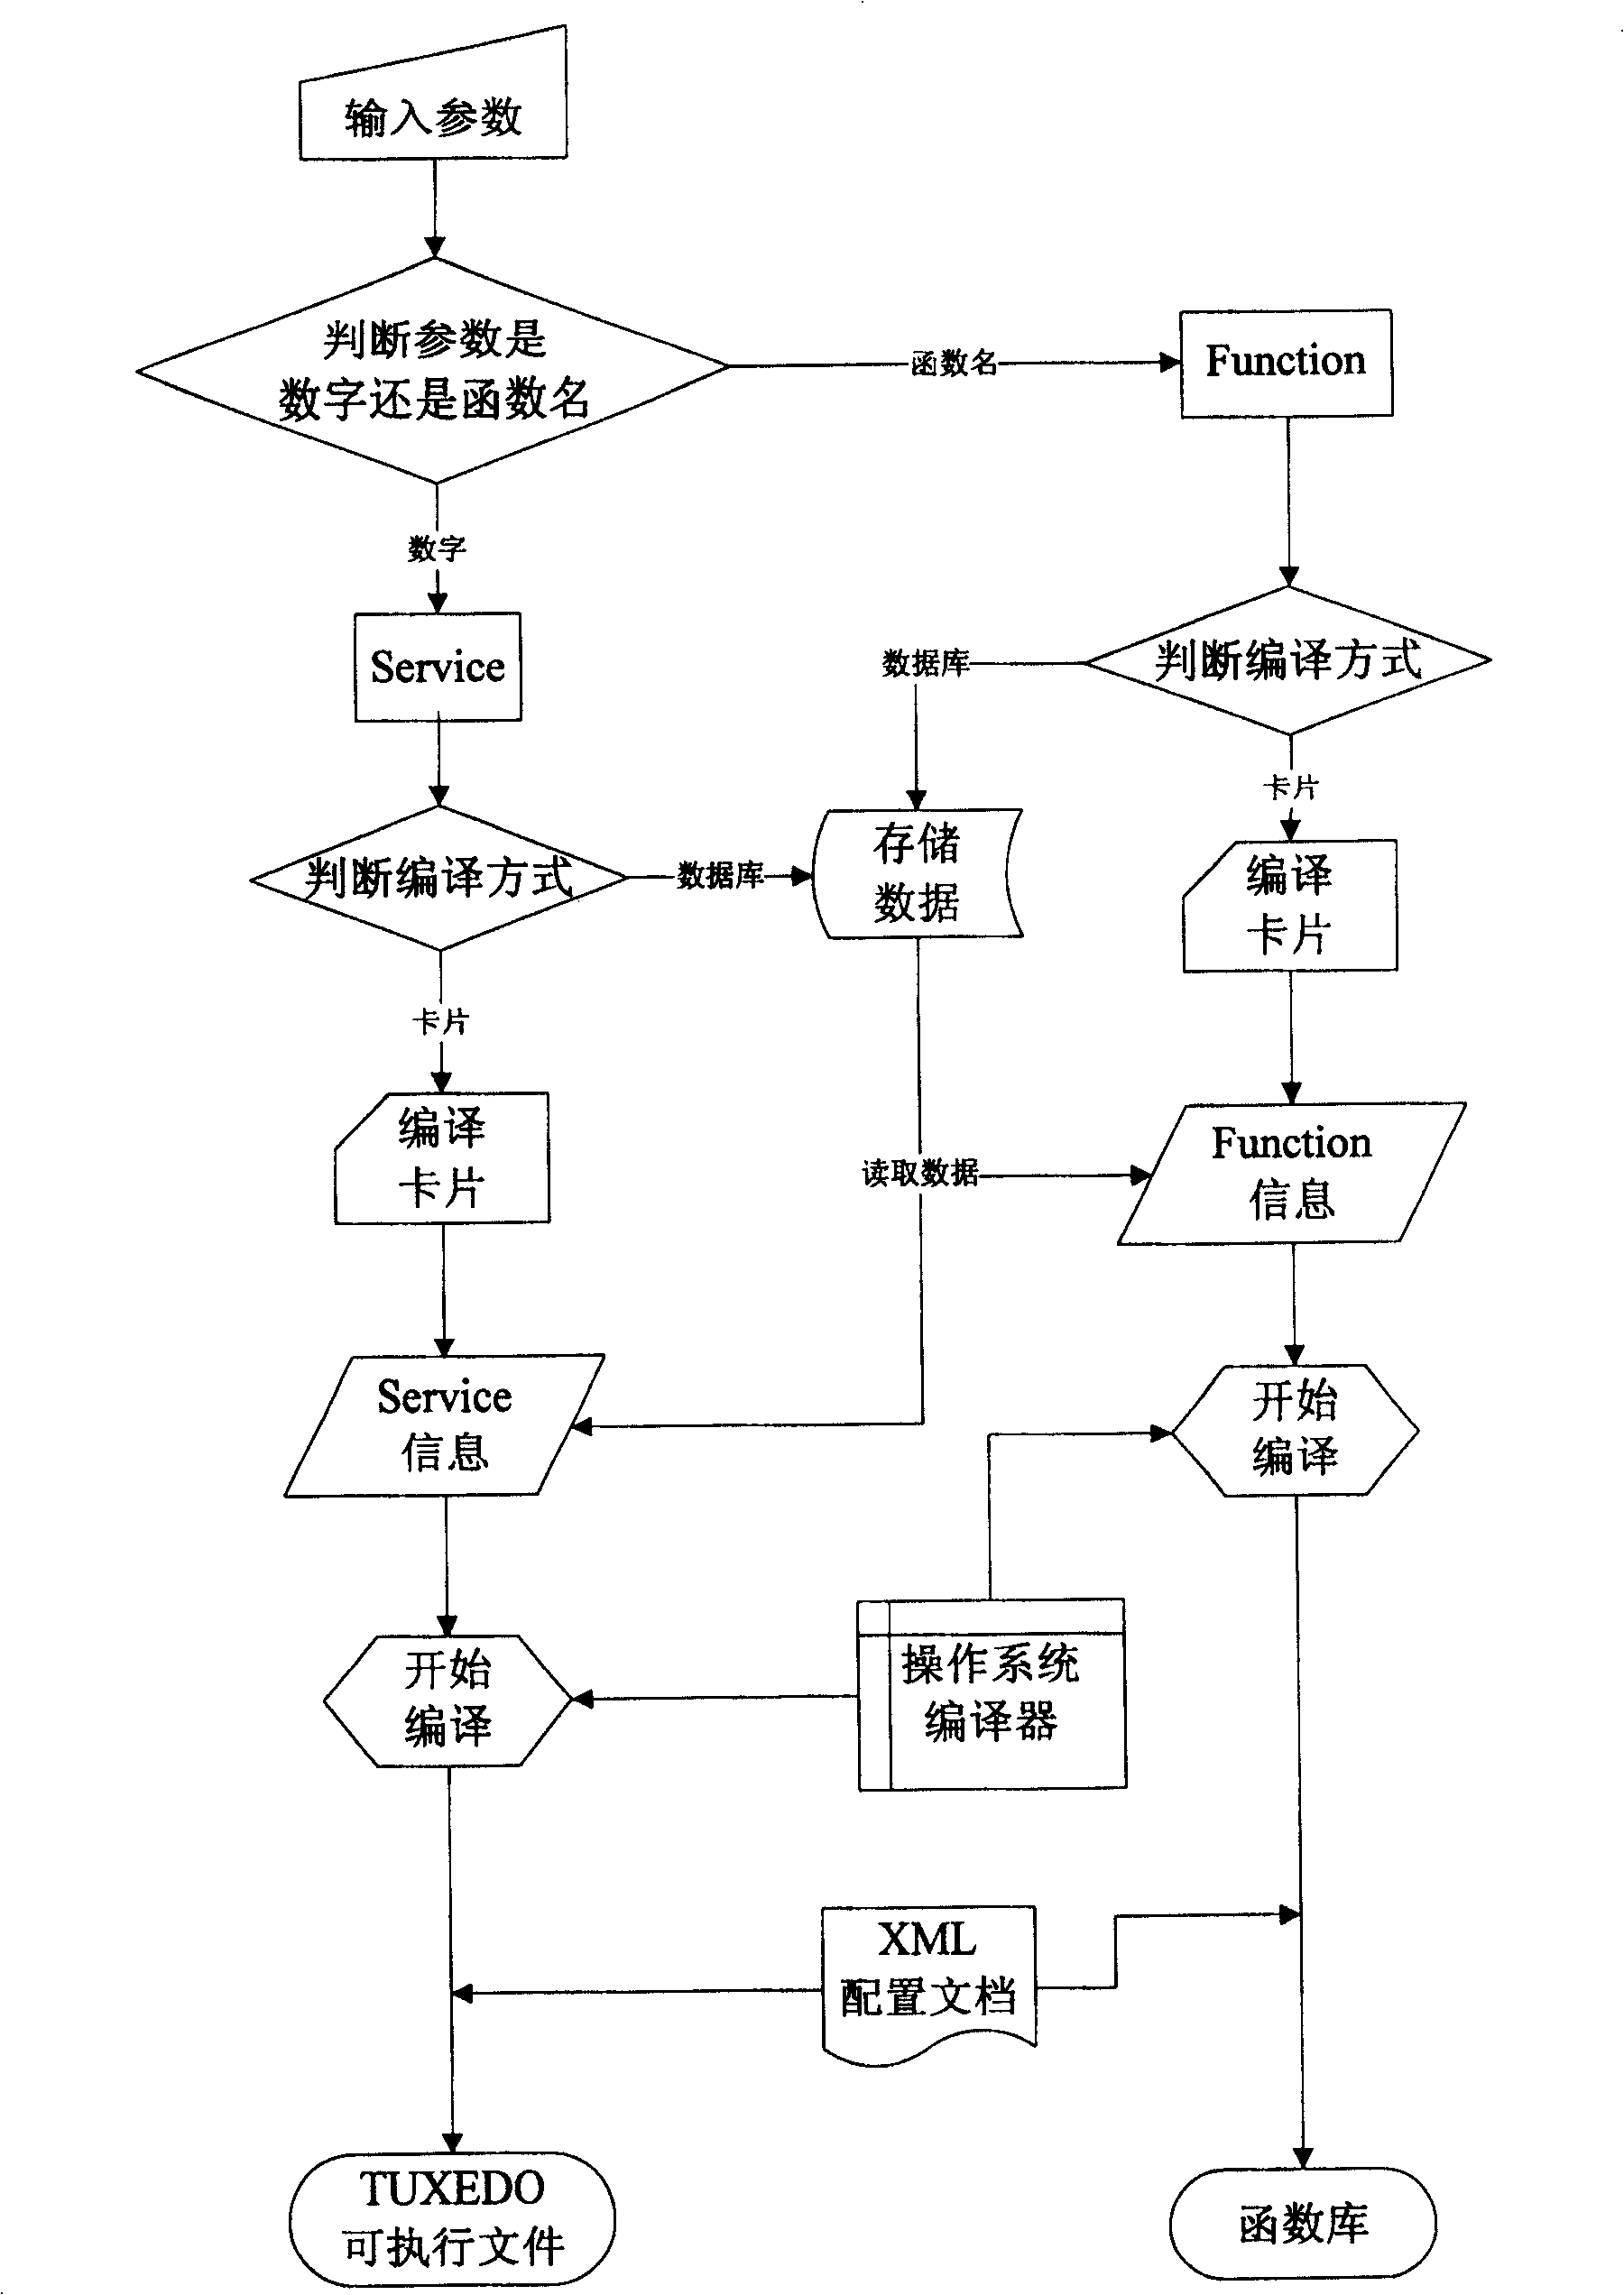 Method for realizing integrated translate and edit surroundings under three layers structure